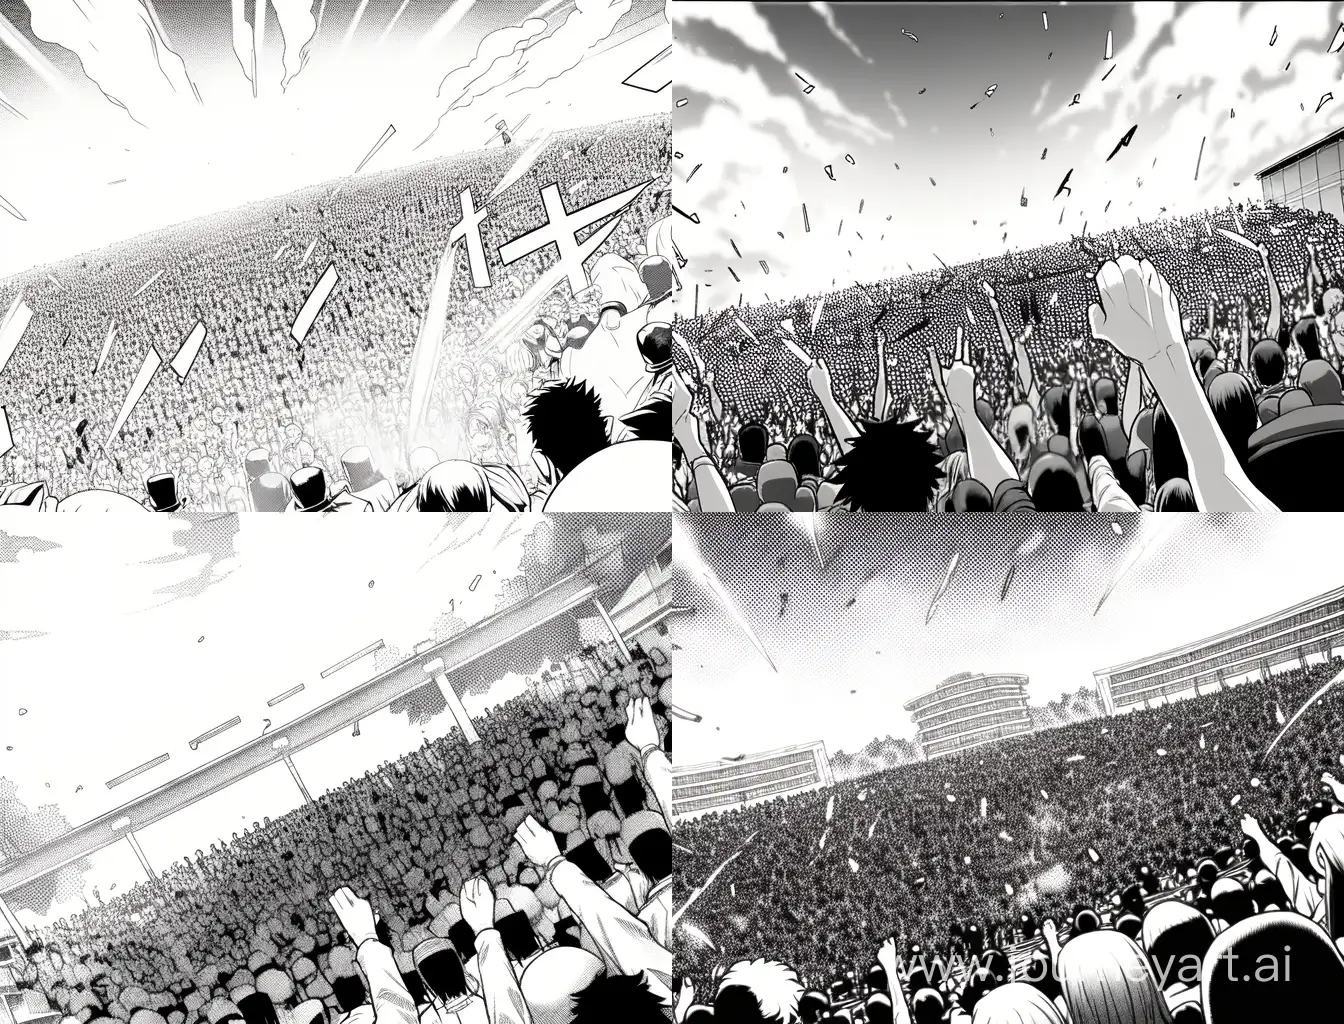 Manga panel, best quality, worms eye view of hundreds of people getting sucked into the sky 